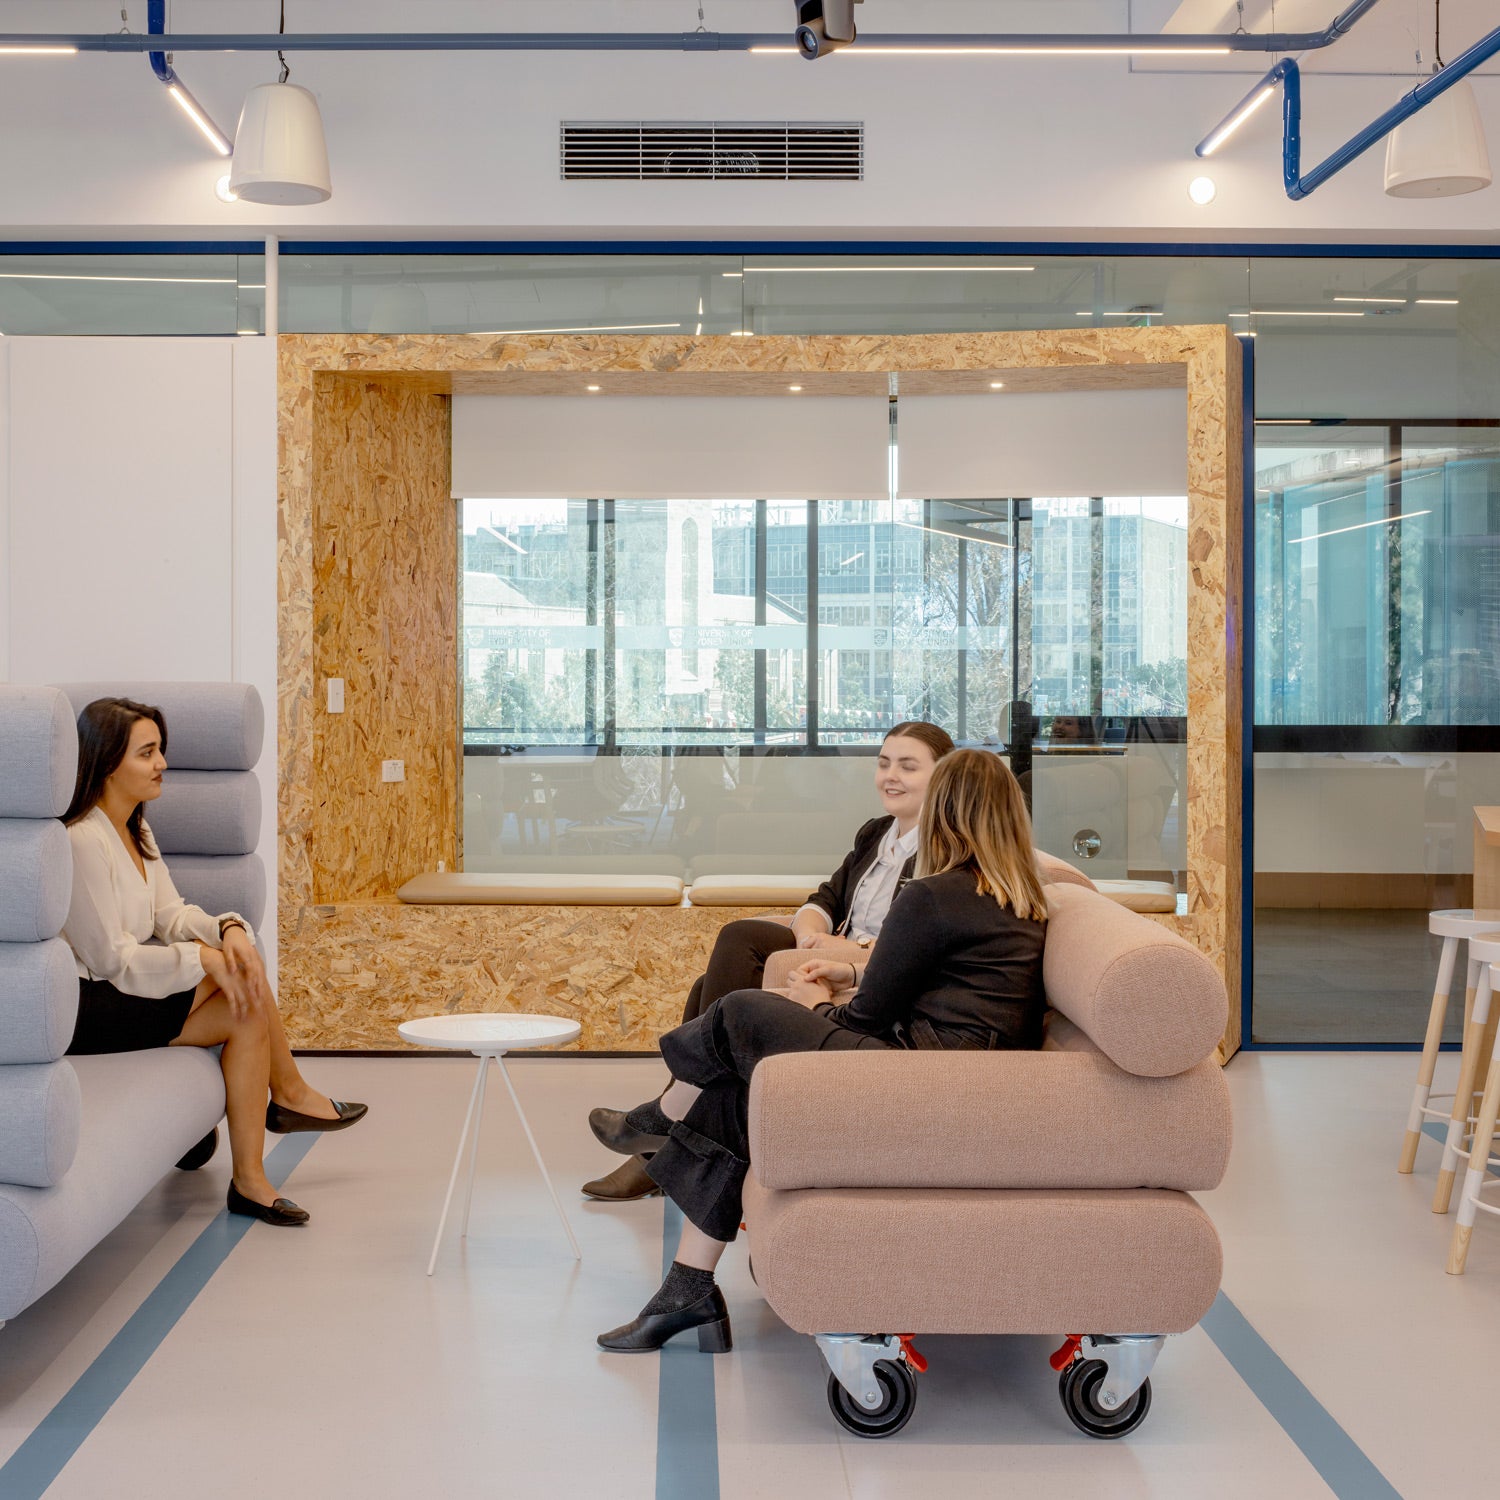 Cabin Booth & Armchairs at INCUBATE Hub by Cox Architecture | DesignByThem